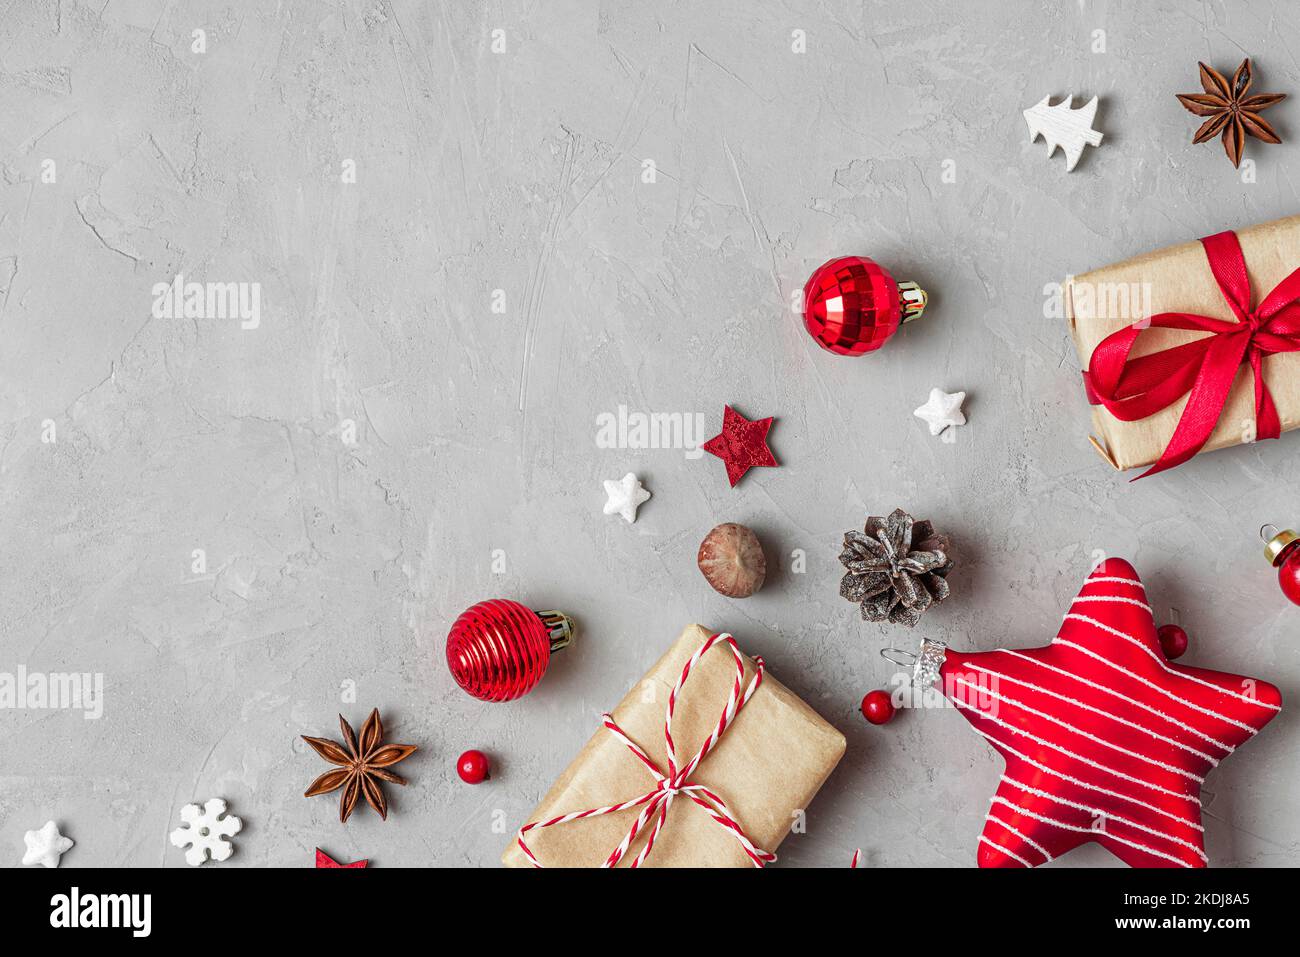 Christmas or Happy New Year background. Gift boxes, red holiday decorations and Christmas star on gray background. Flat lay. Top view with copy space Stock Photo